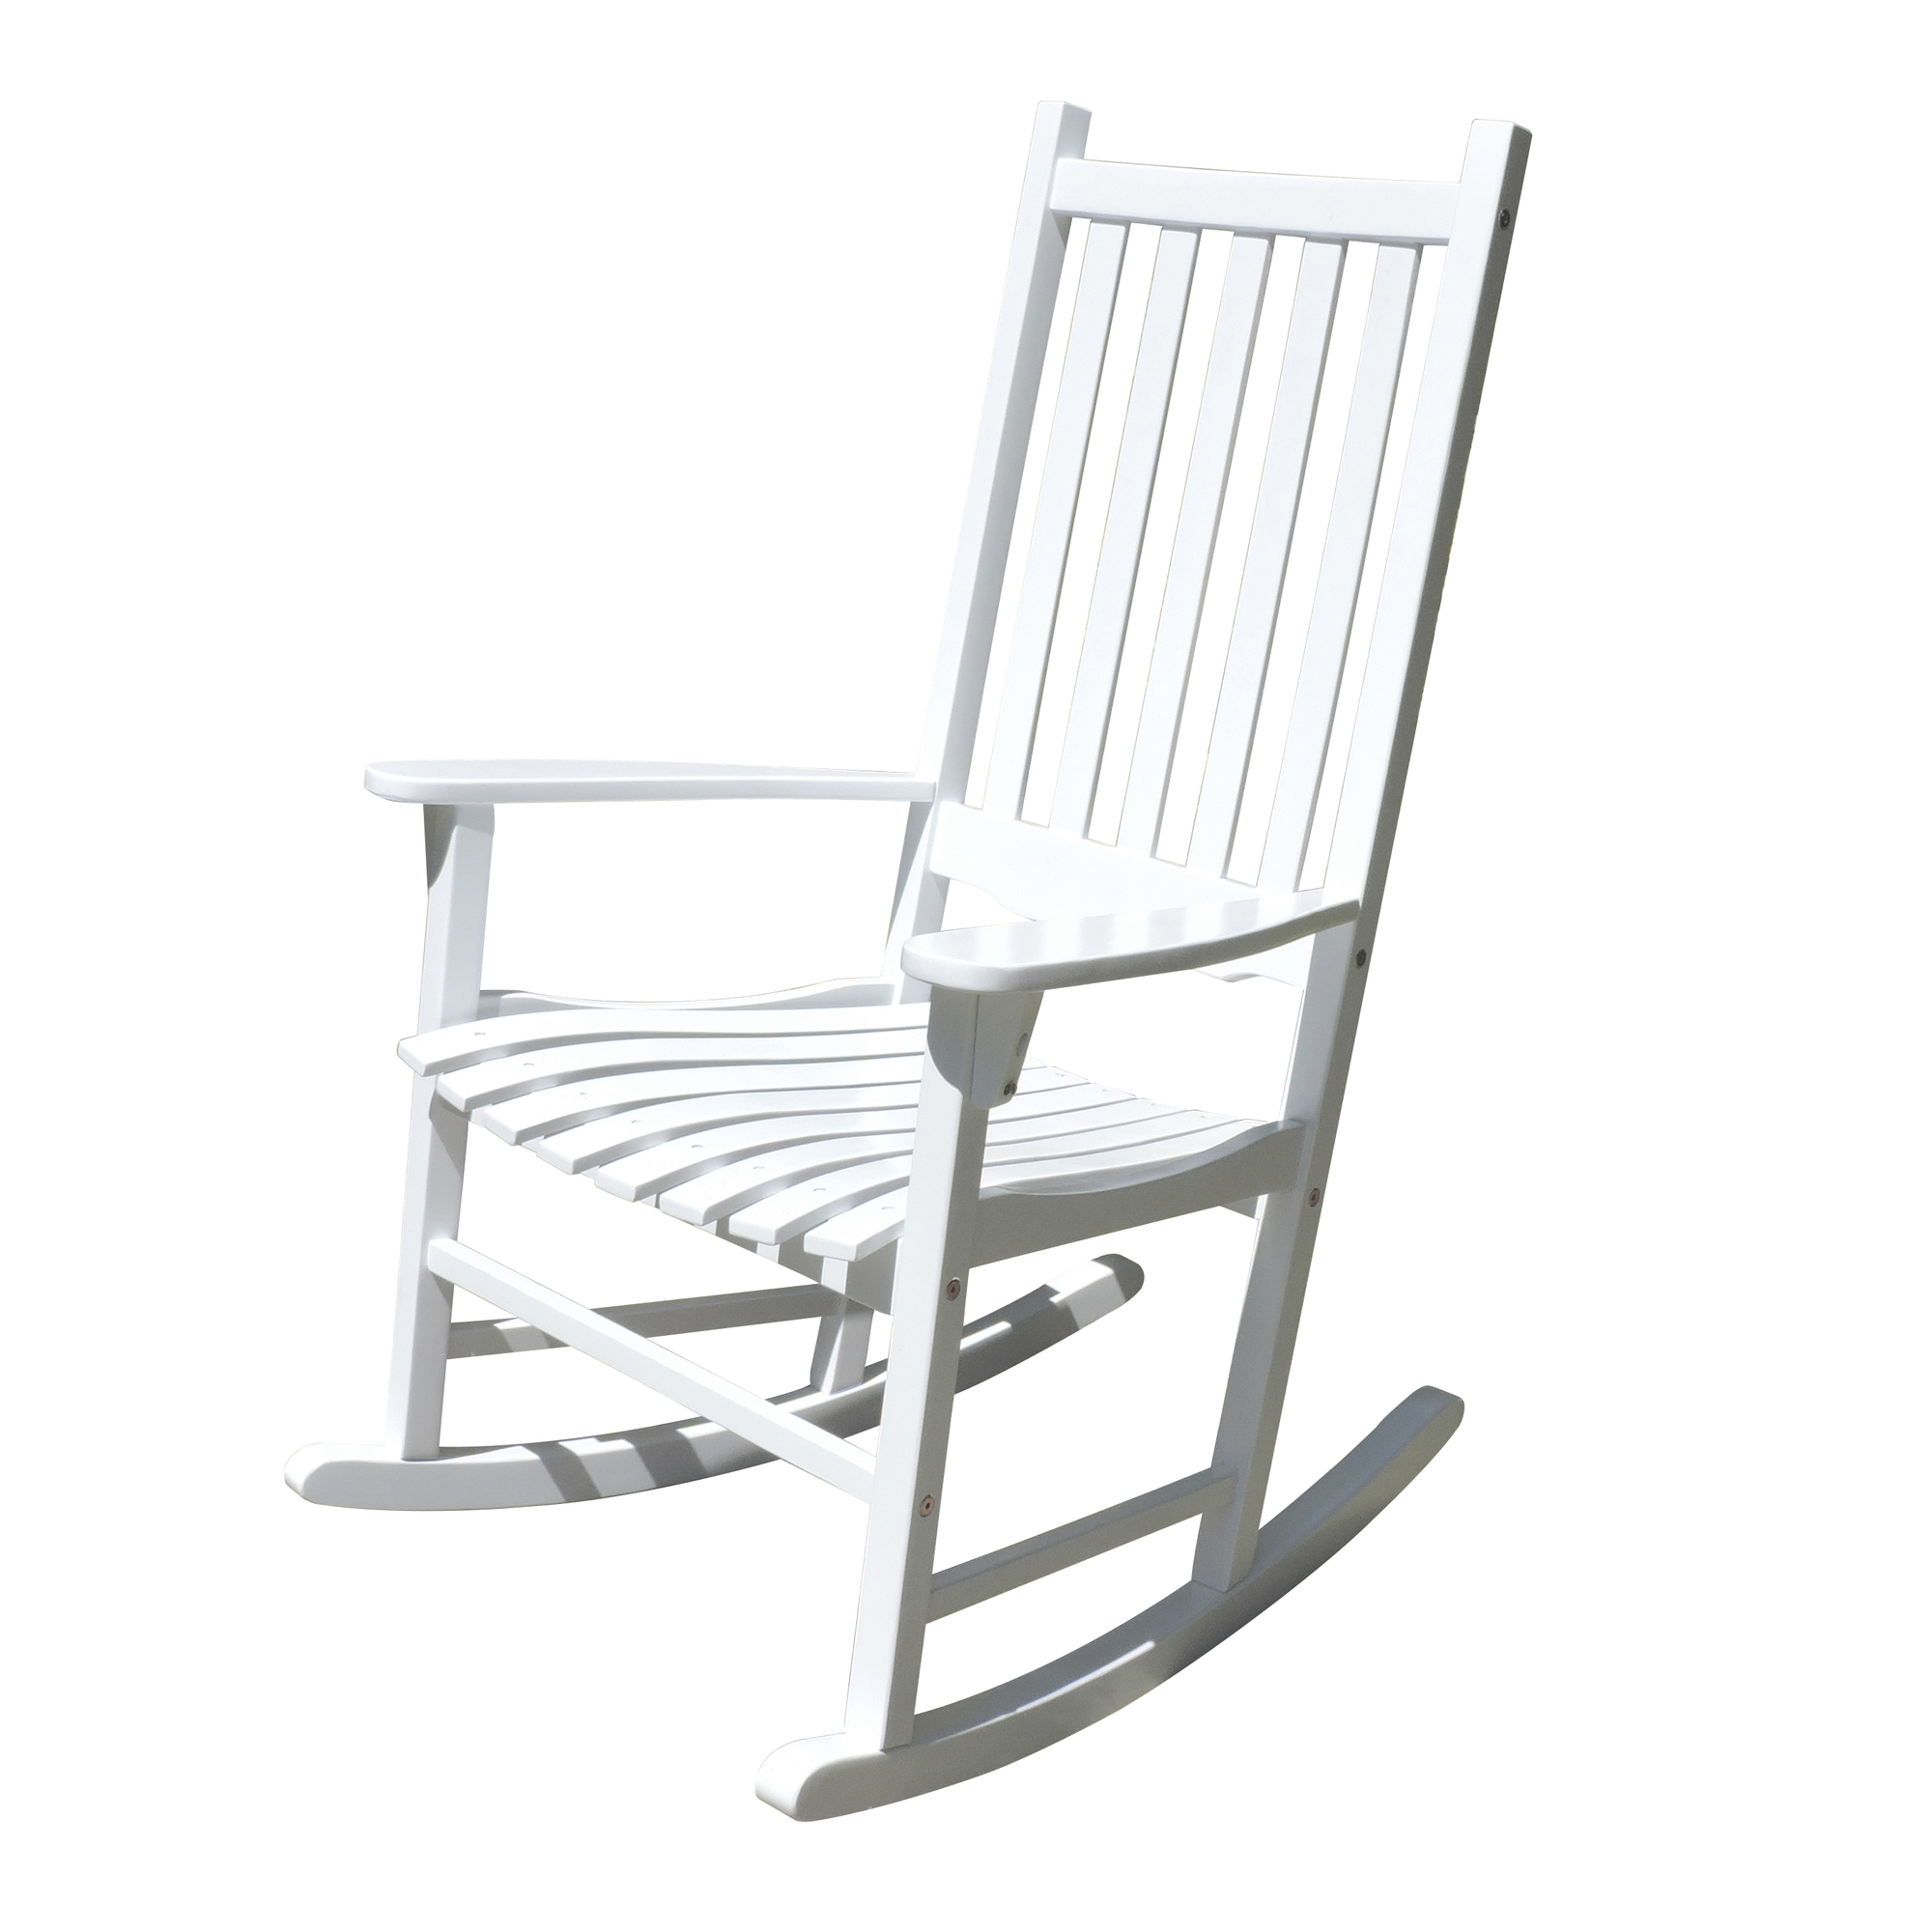 Merry Products, Traditional Rocking Chair, White Painted, Primary Color White, Included (qty.) 1, Model MPG-PT-41110WP